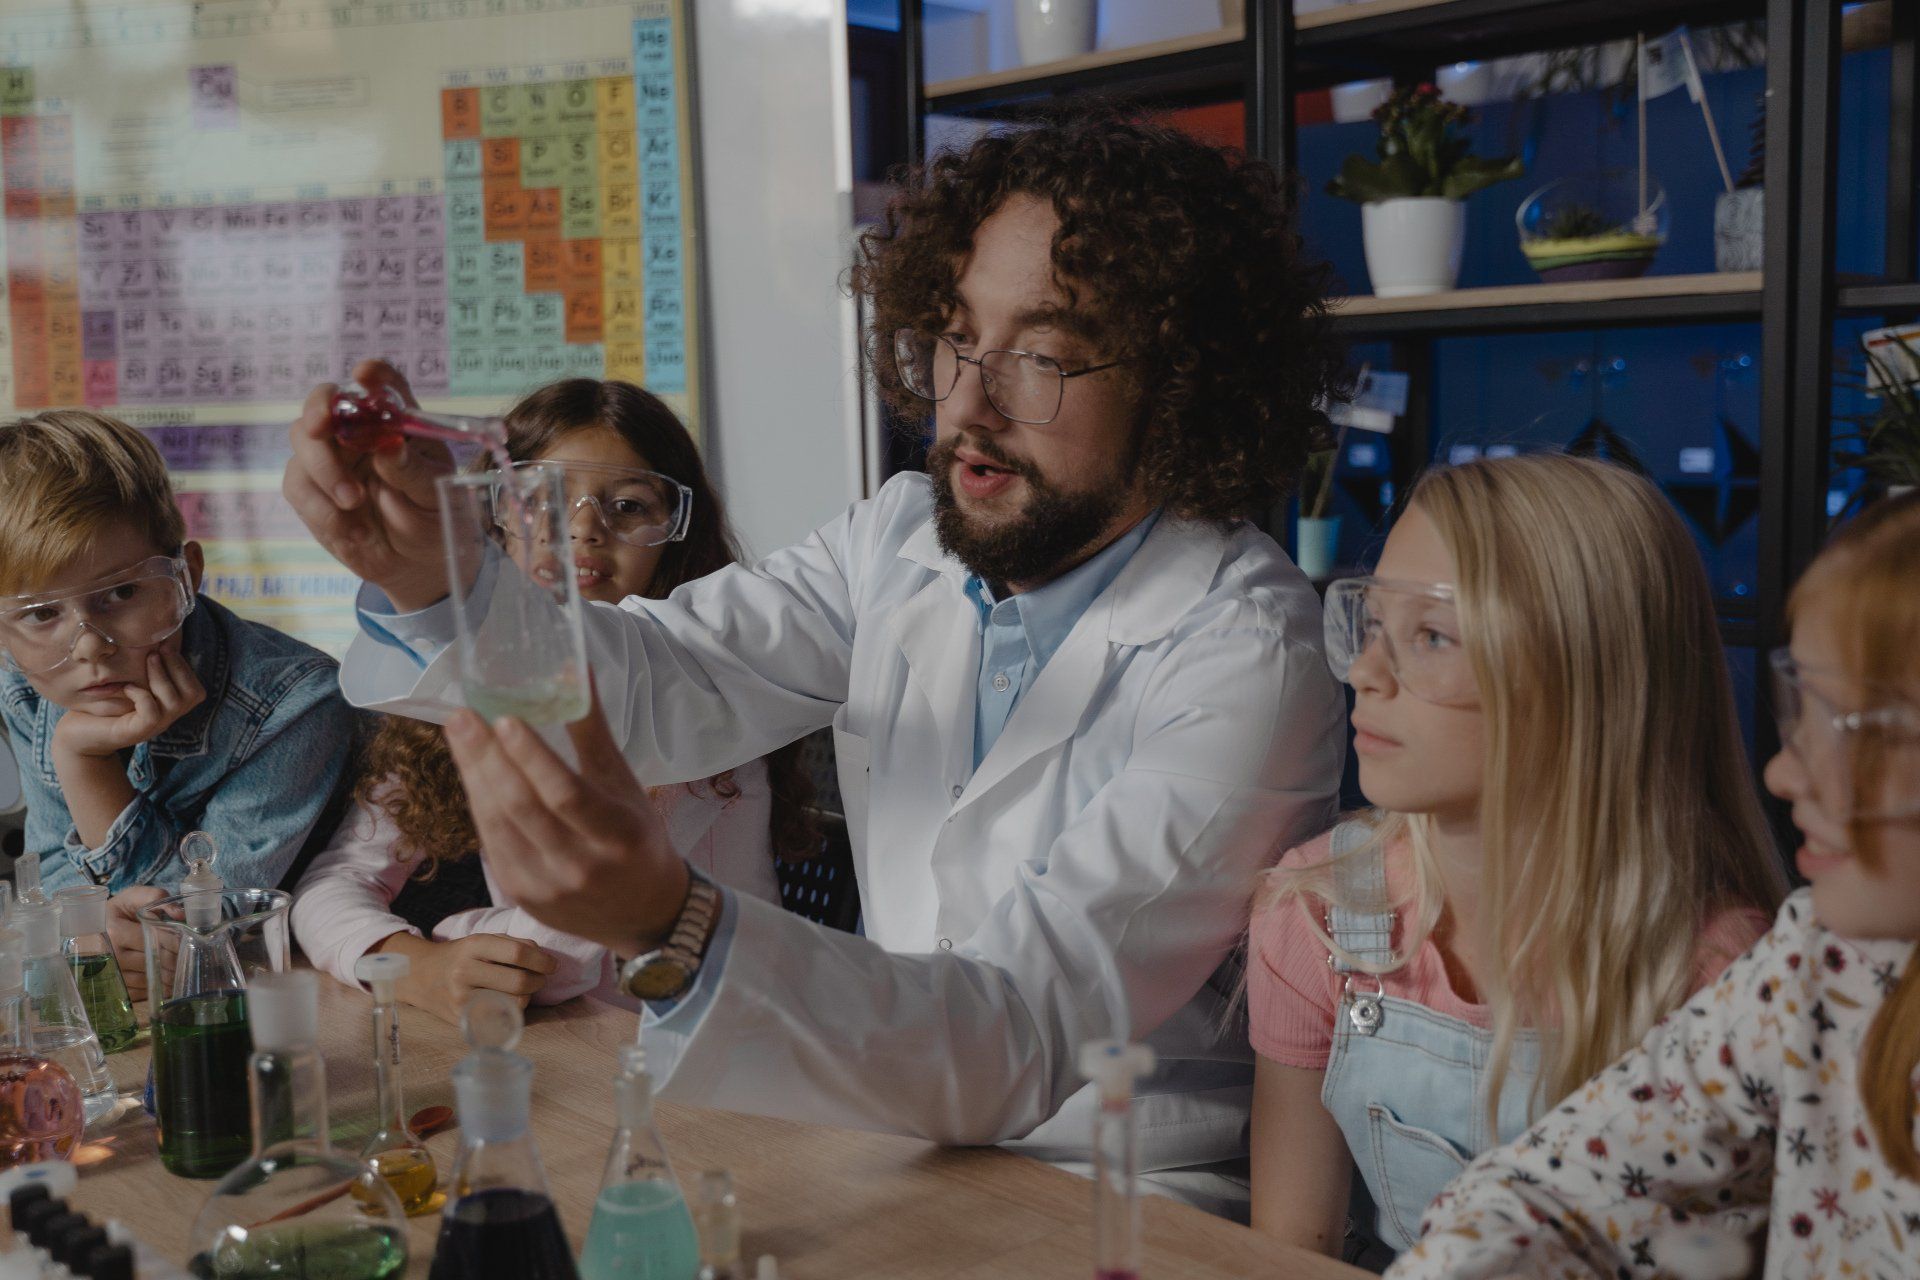 A man in a lab coat is teaching a group of children how to do a science experiment.